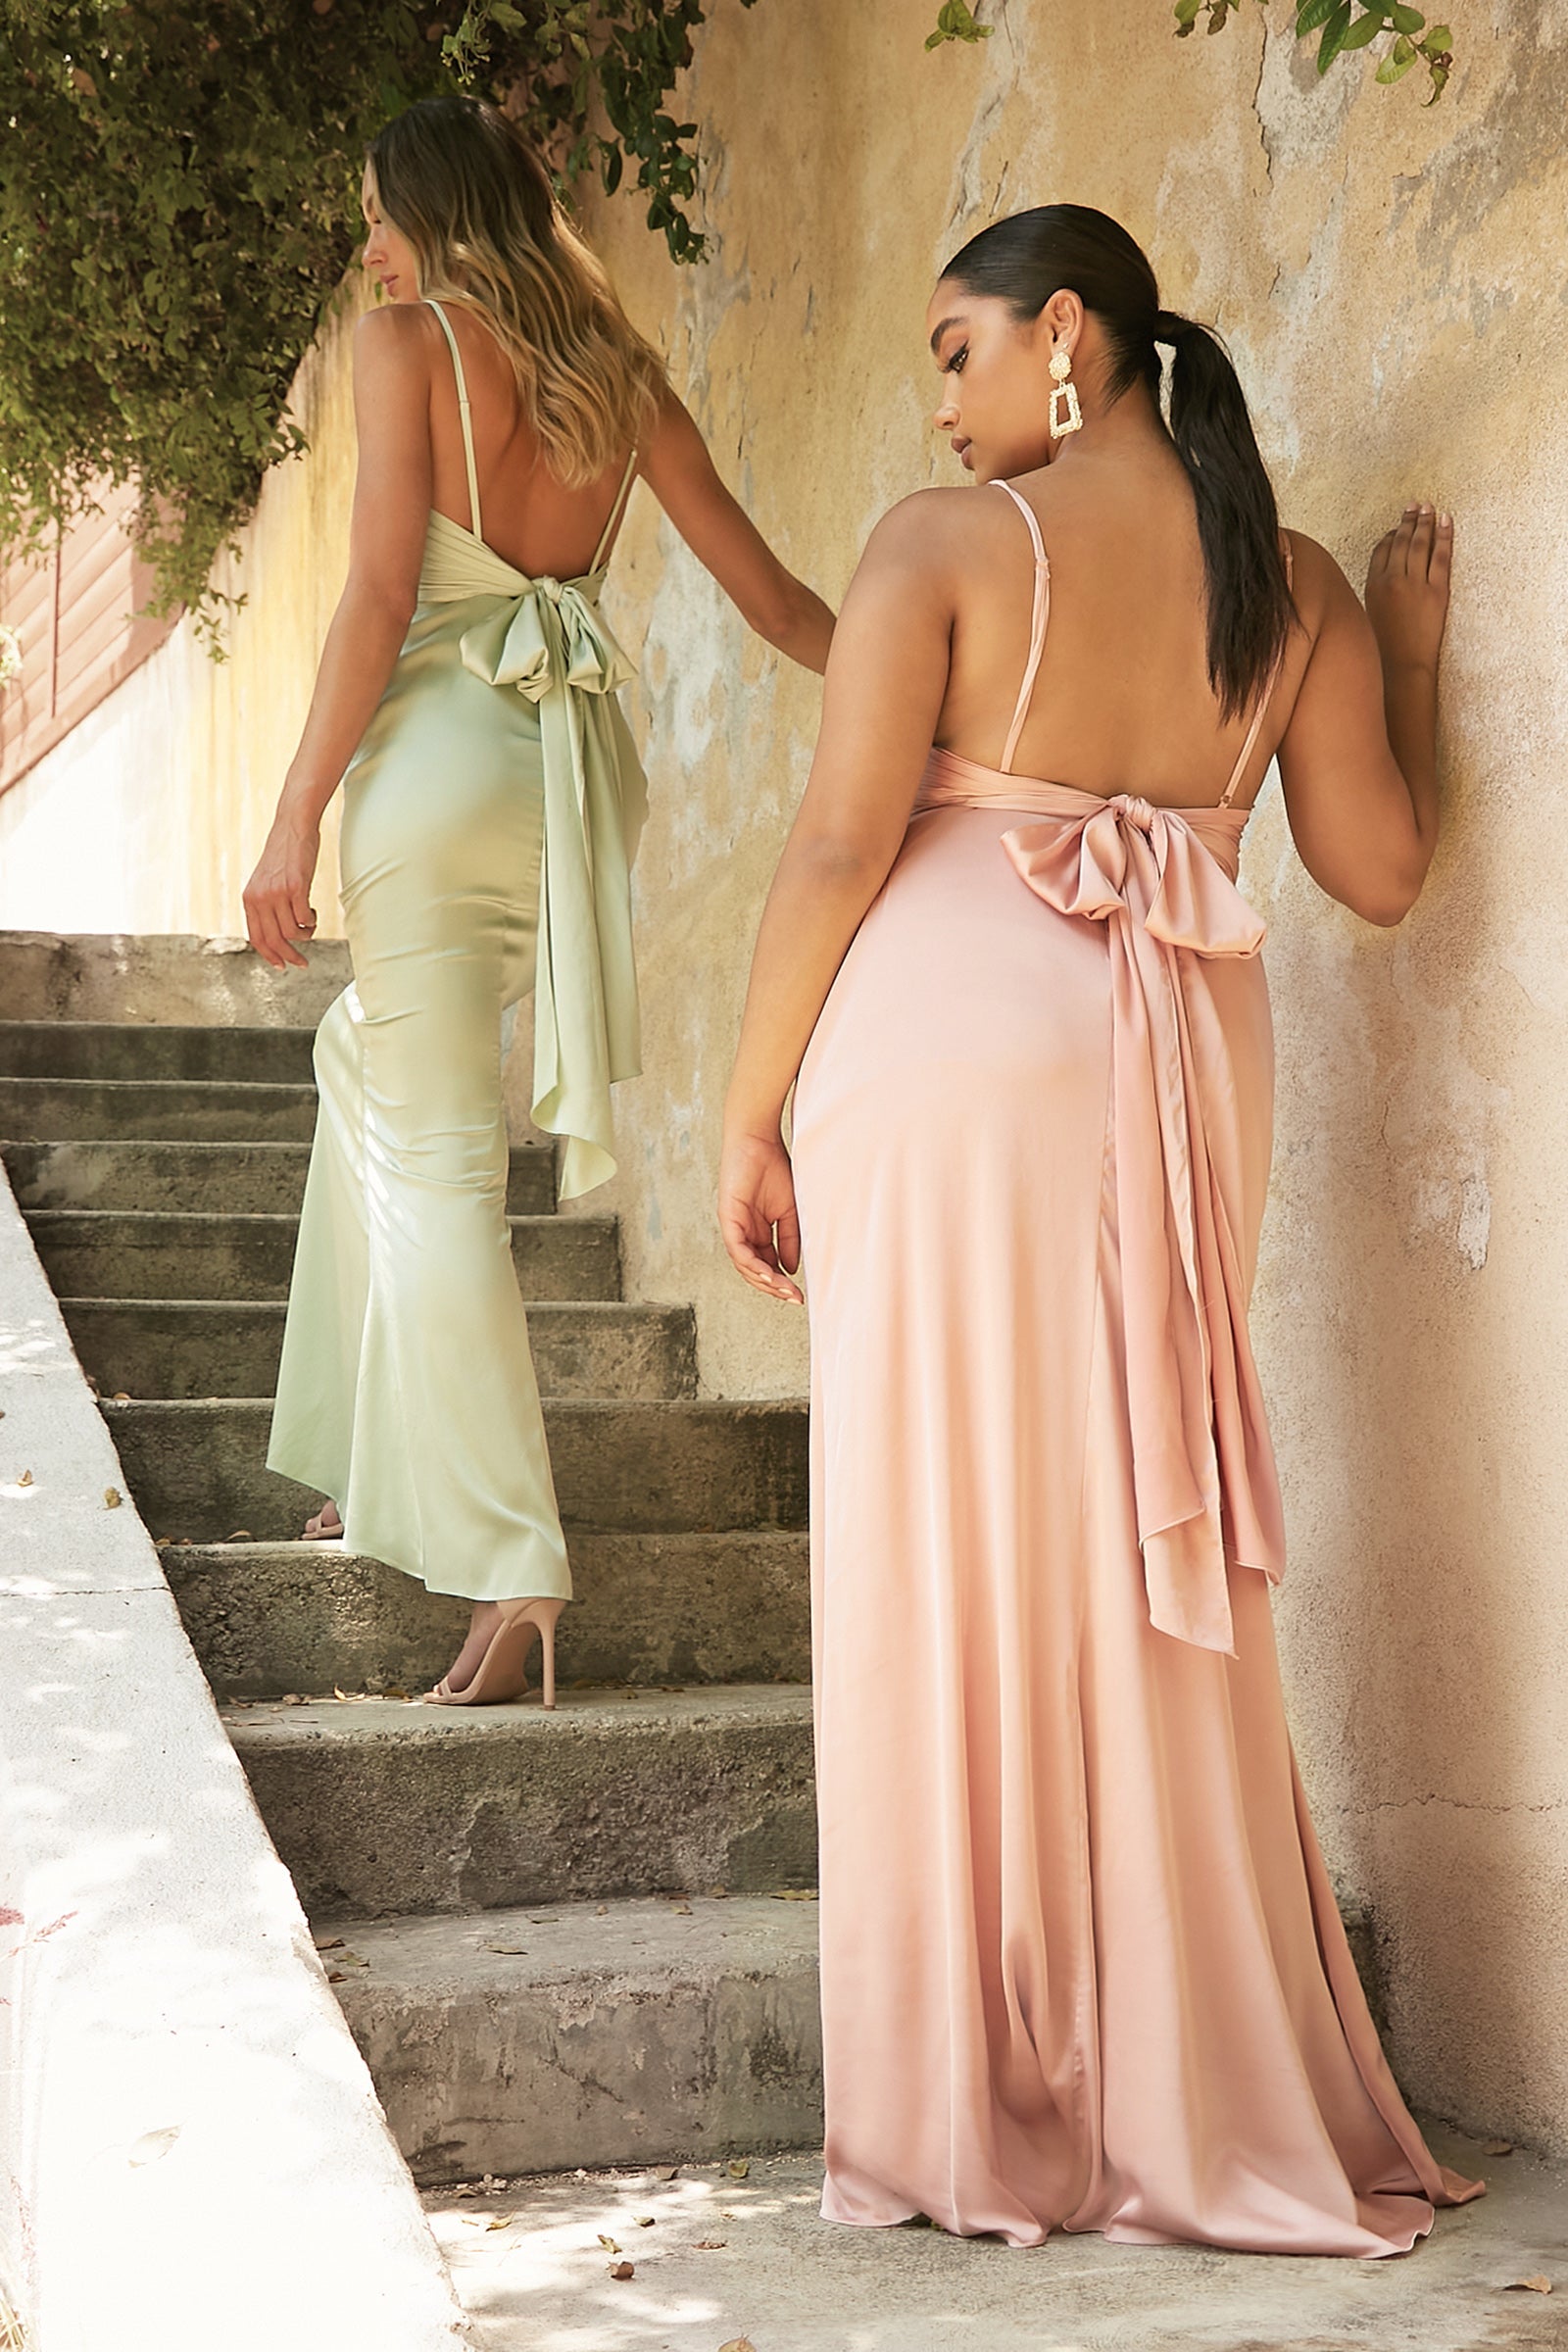 Fitted Satin Dress With Cowl Neckline Satin Bridesmaid Dresses Fishtail Dress Mermaid Dress UME London Sage Green Plus Size